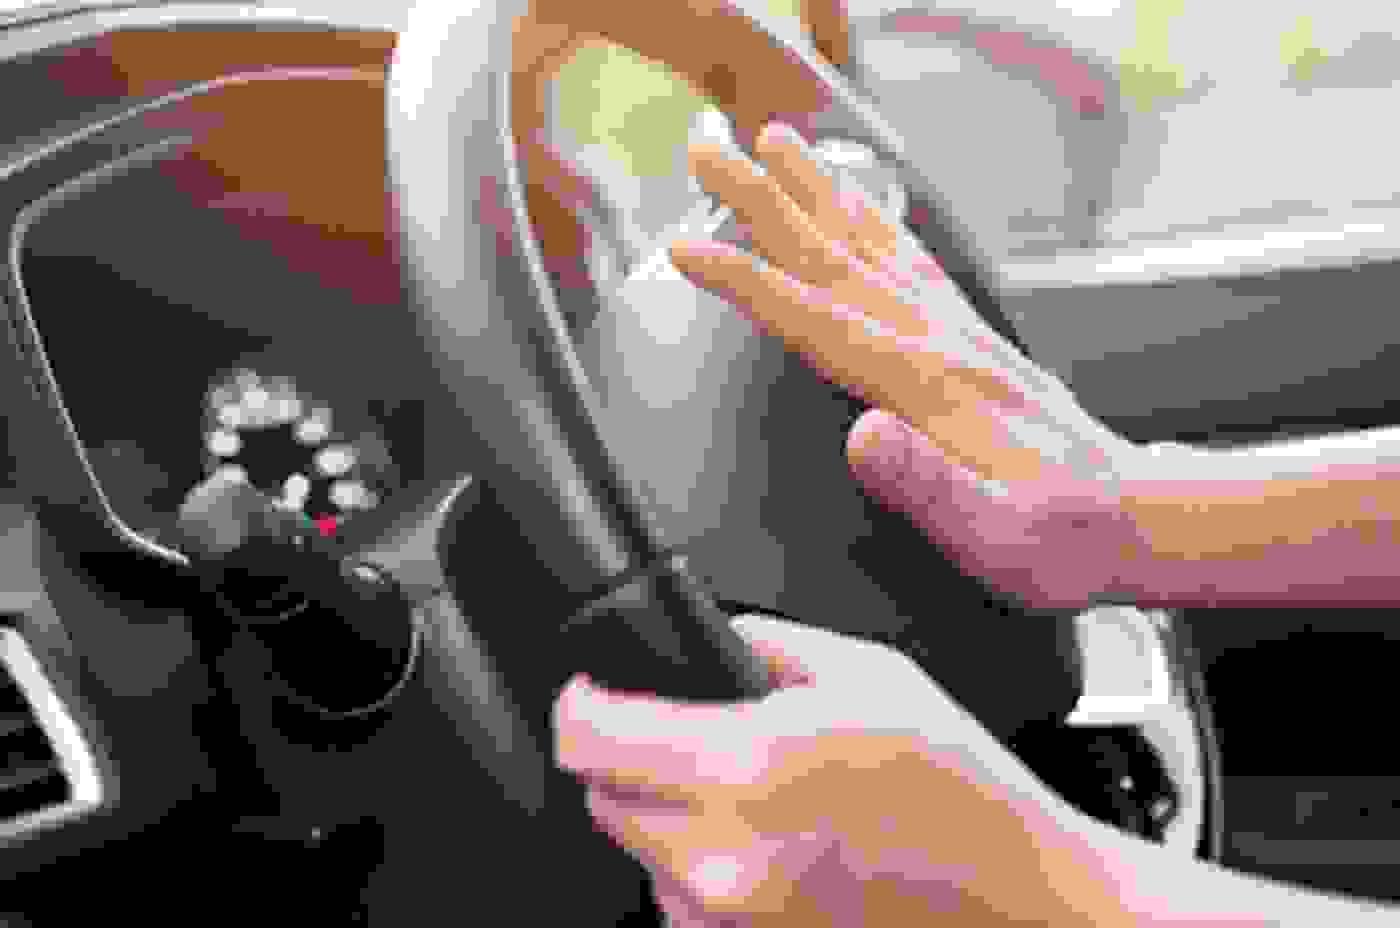 A quarter of drivers admit sounding their horn at slow drivers in front